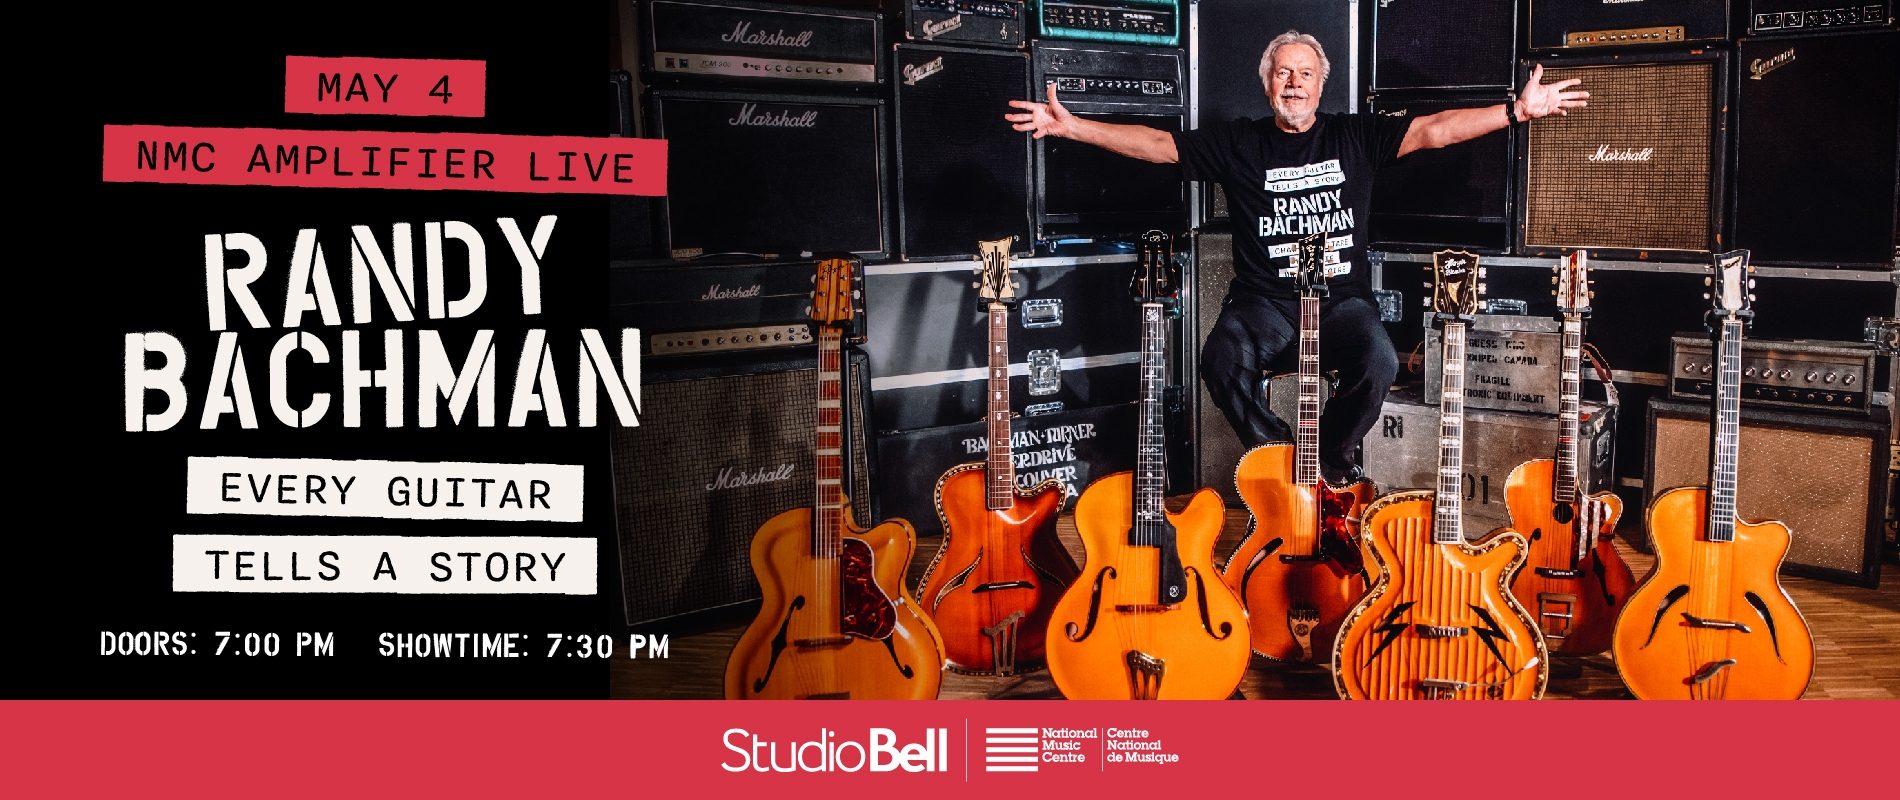 NMC Amplifier Live Every Guitar Tells a Story with Randy Bachman